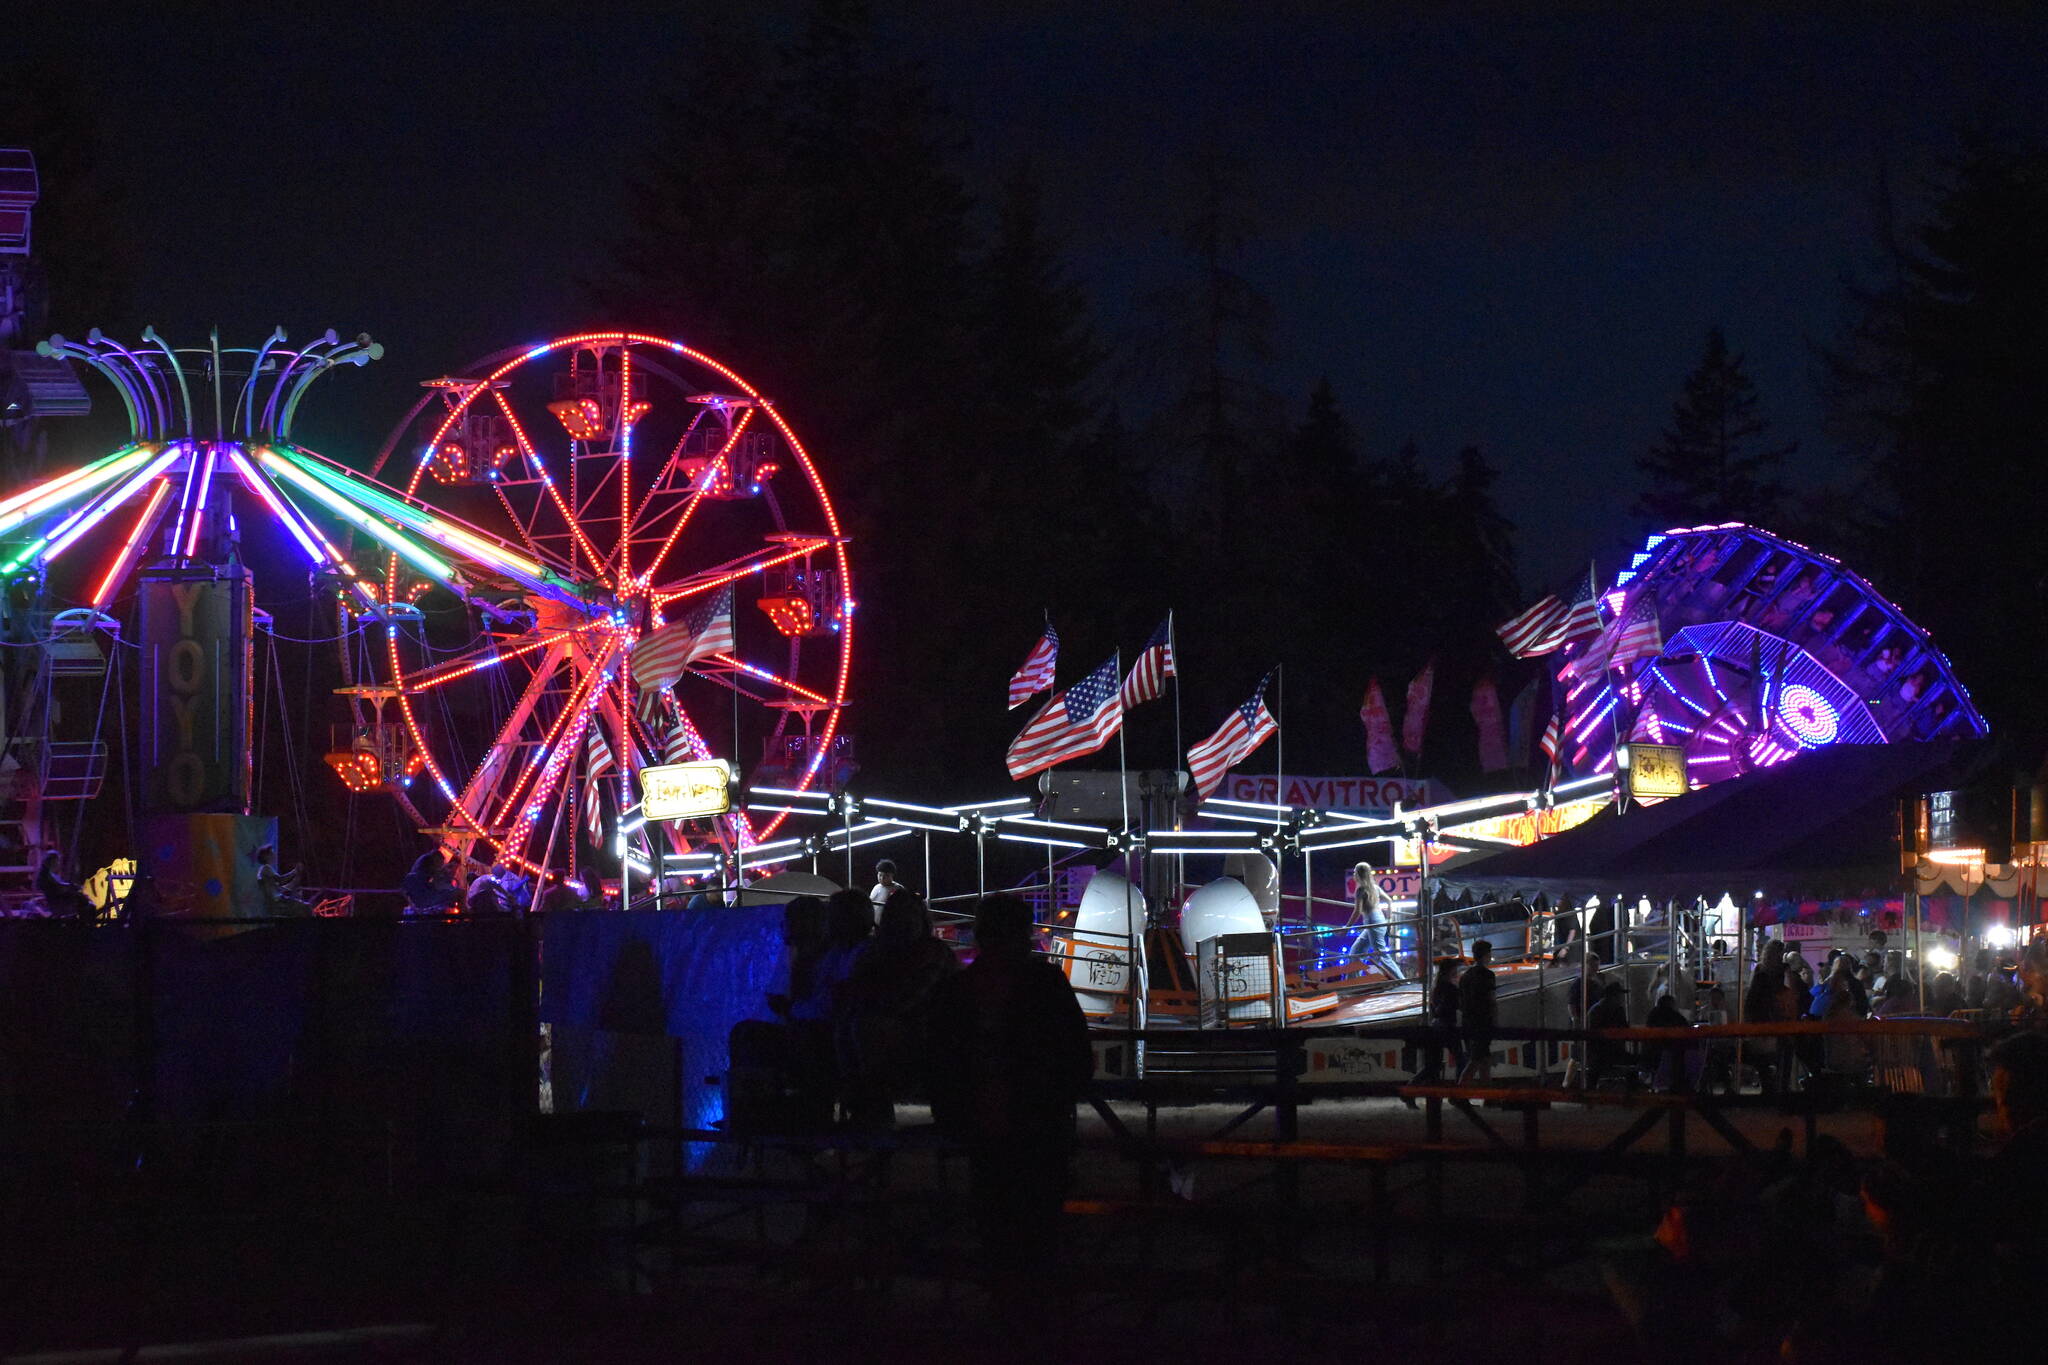 Matthew N. Wells / The Daily World
The Grays Harbor County Fair seen at night shows the variety of colors from a ride called YoYo, the ferris wheel and Gravitron, which spins people around so fast it’s hard to move your arms.